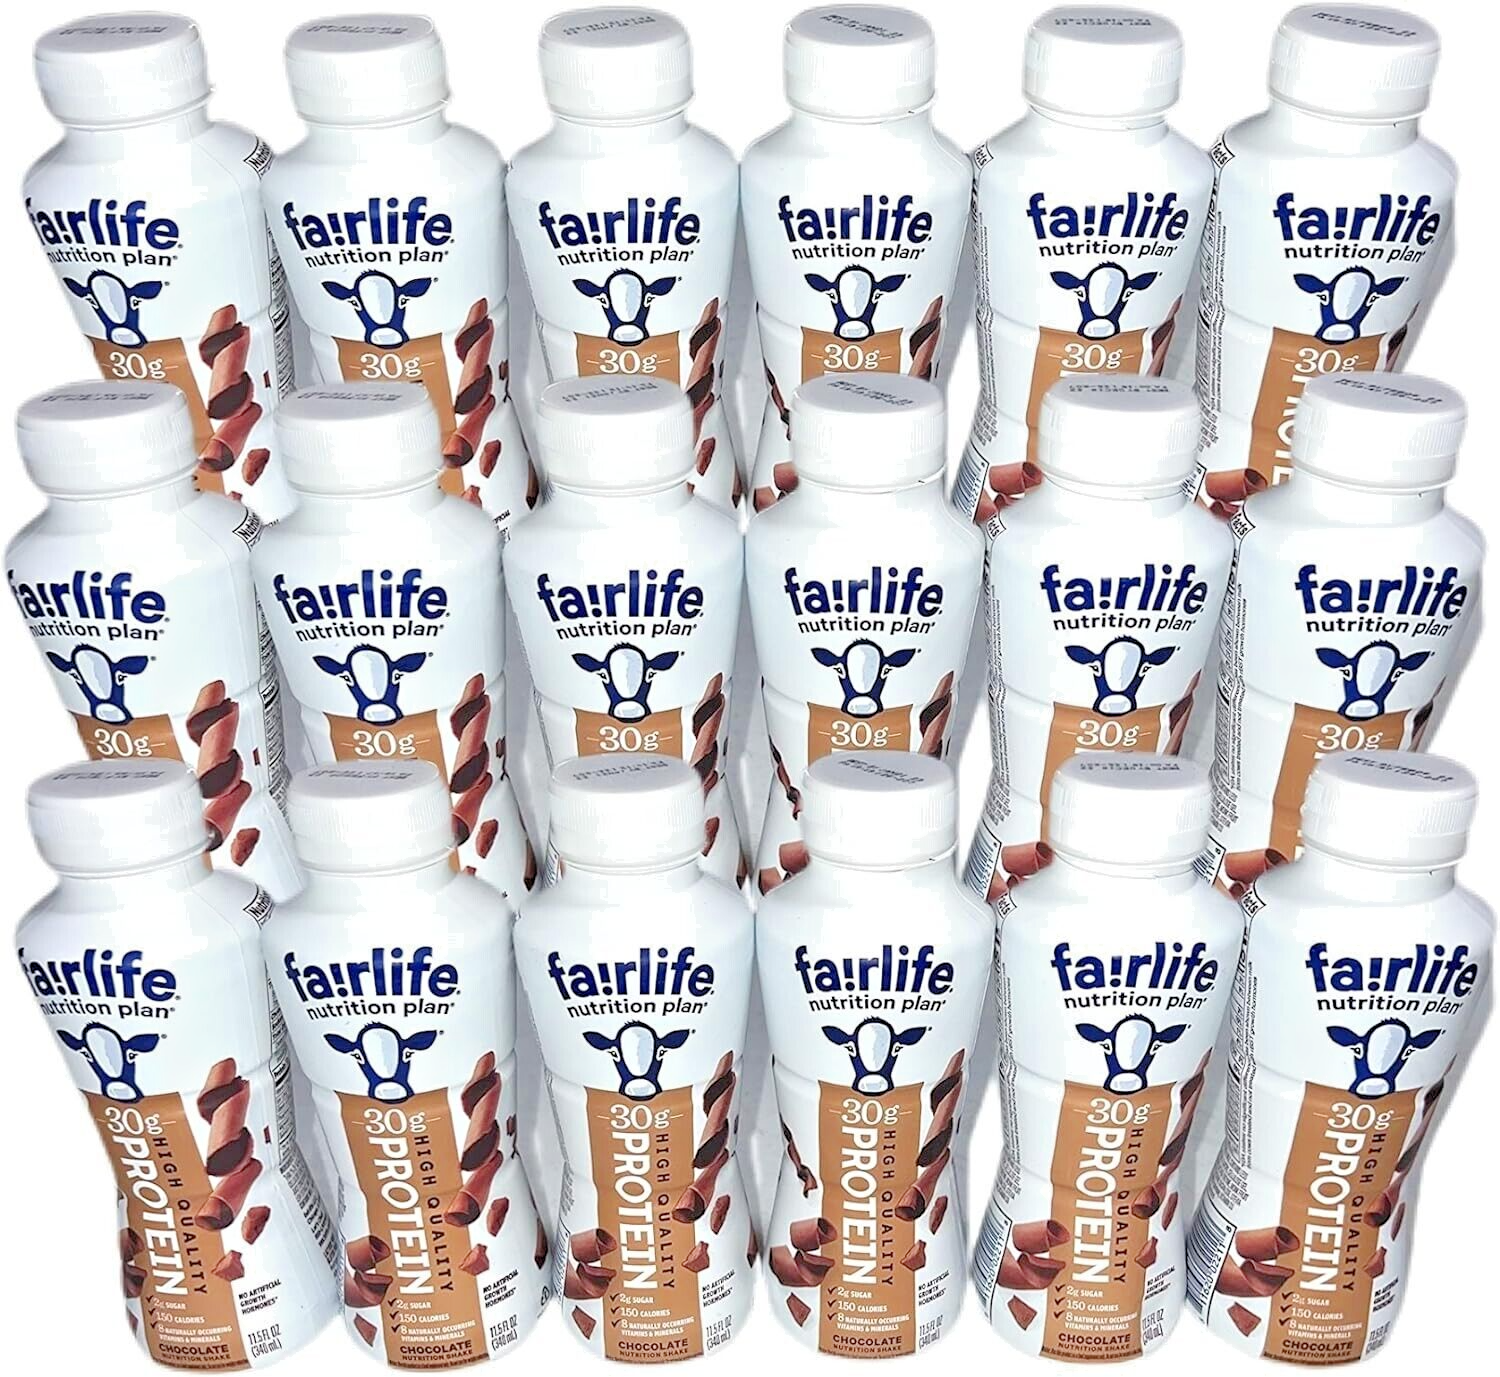 Primary image for FAIRLIFE PROTEIN SHAKE DRINKS CHOCOLATE NUTRITION PLAN 30 GRAMS 11.5oz - 18 BTLS